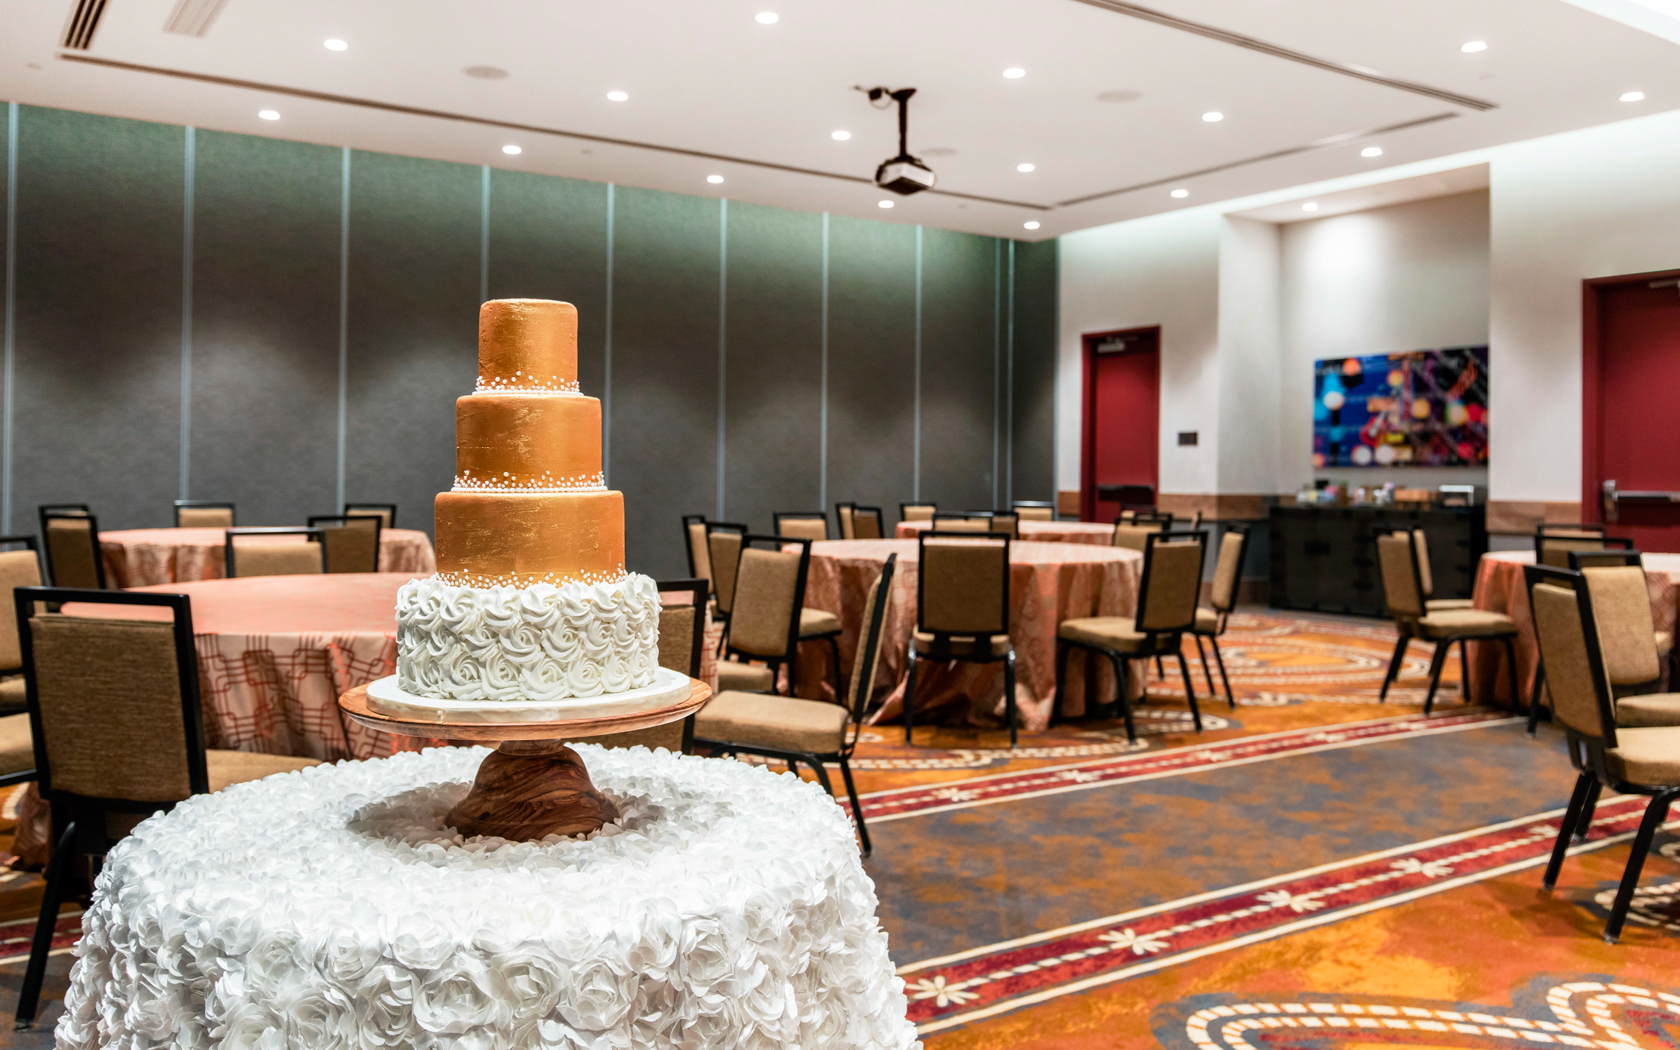 gallery View of a empty events room of a hotel with a three tier cake in the table